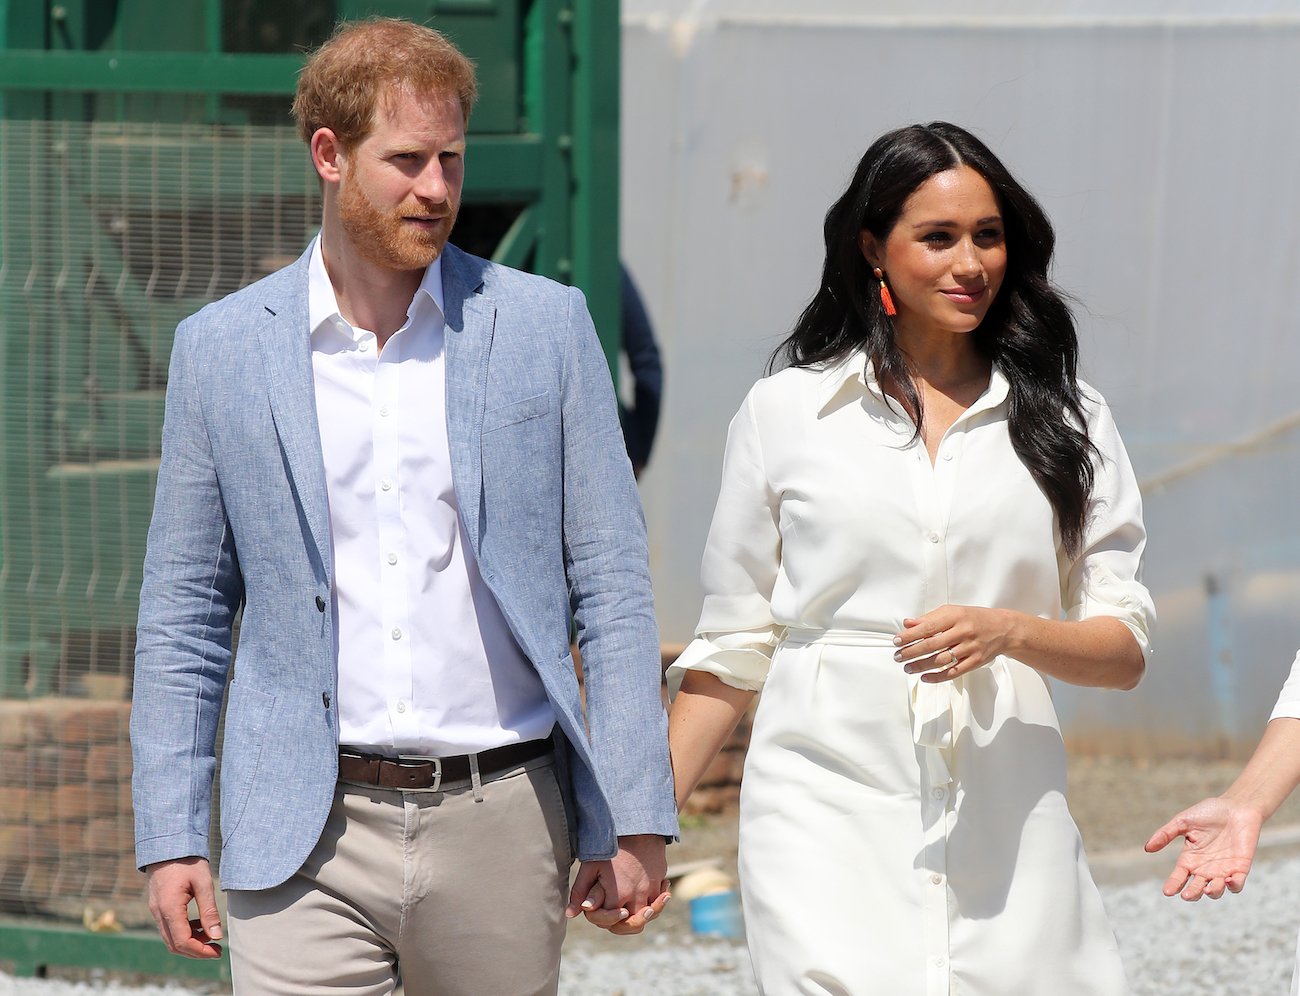 Commentator Calls Prince Harry and Meghan Markle’s Award for Fighting Racism ‘Laughable’